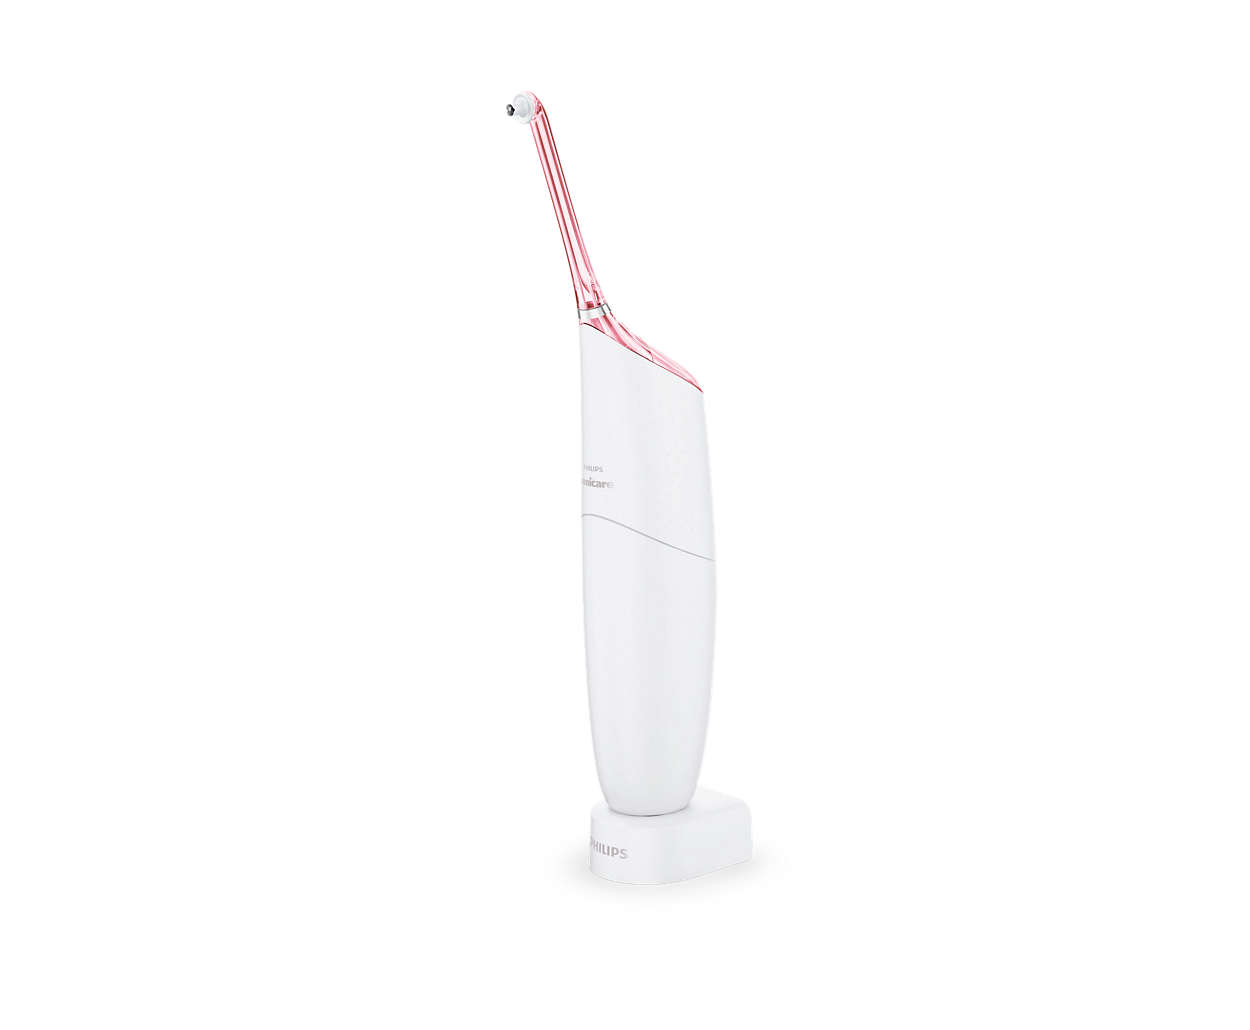 win emotional Captain brie AirFloss Ultra- Interdental flossing cleaner HX8331/02 | Sonicare